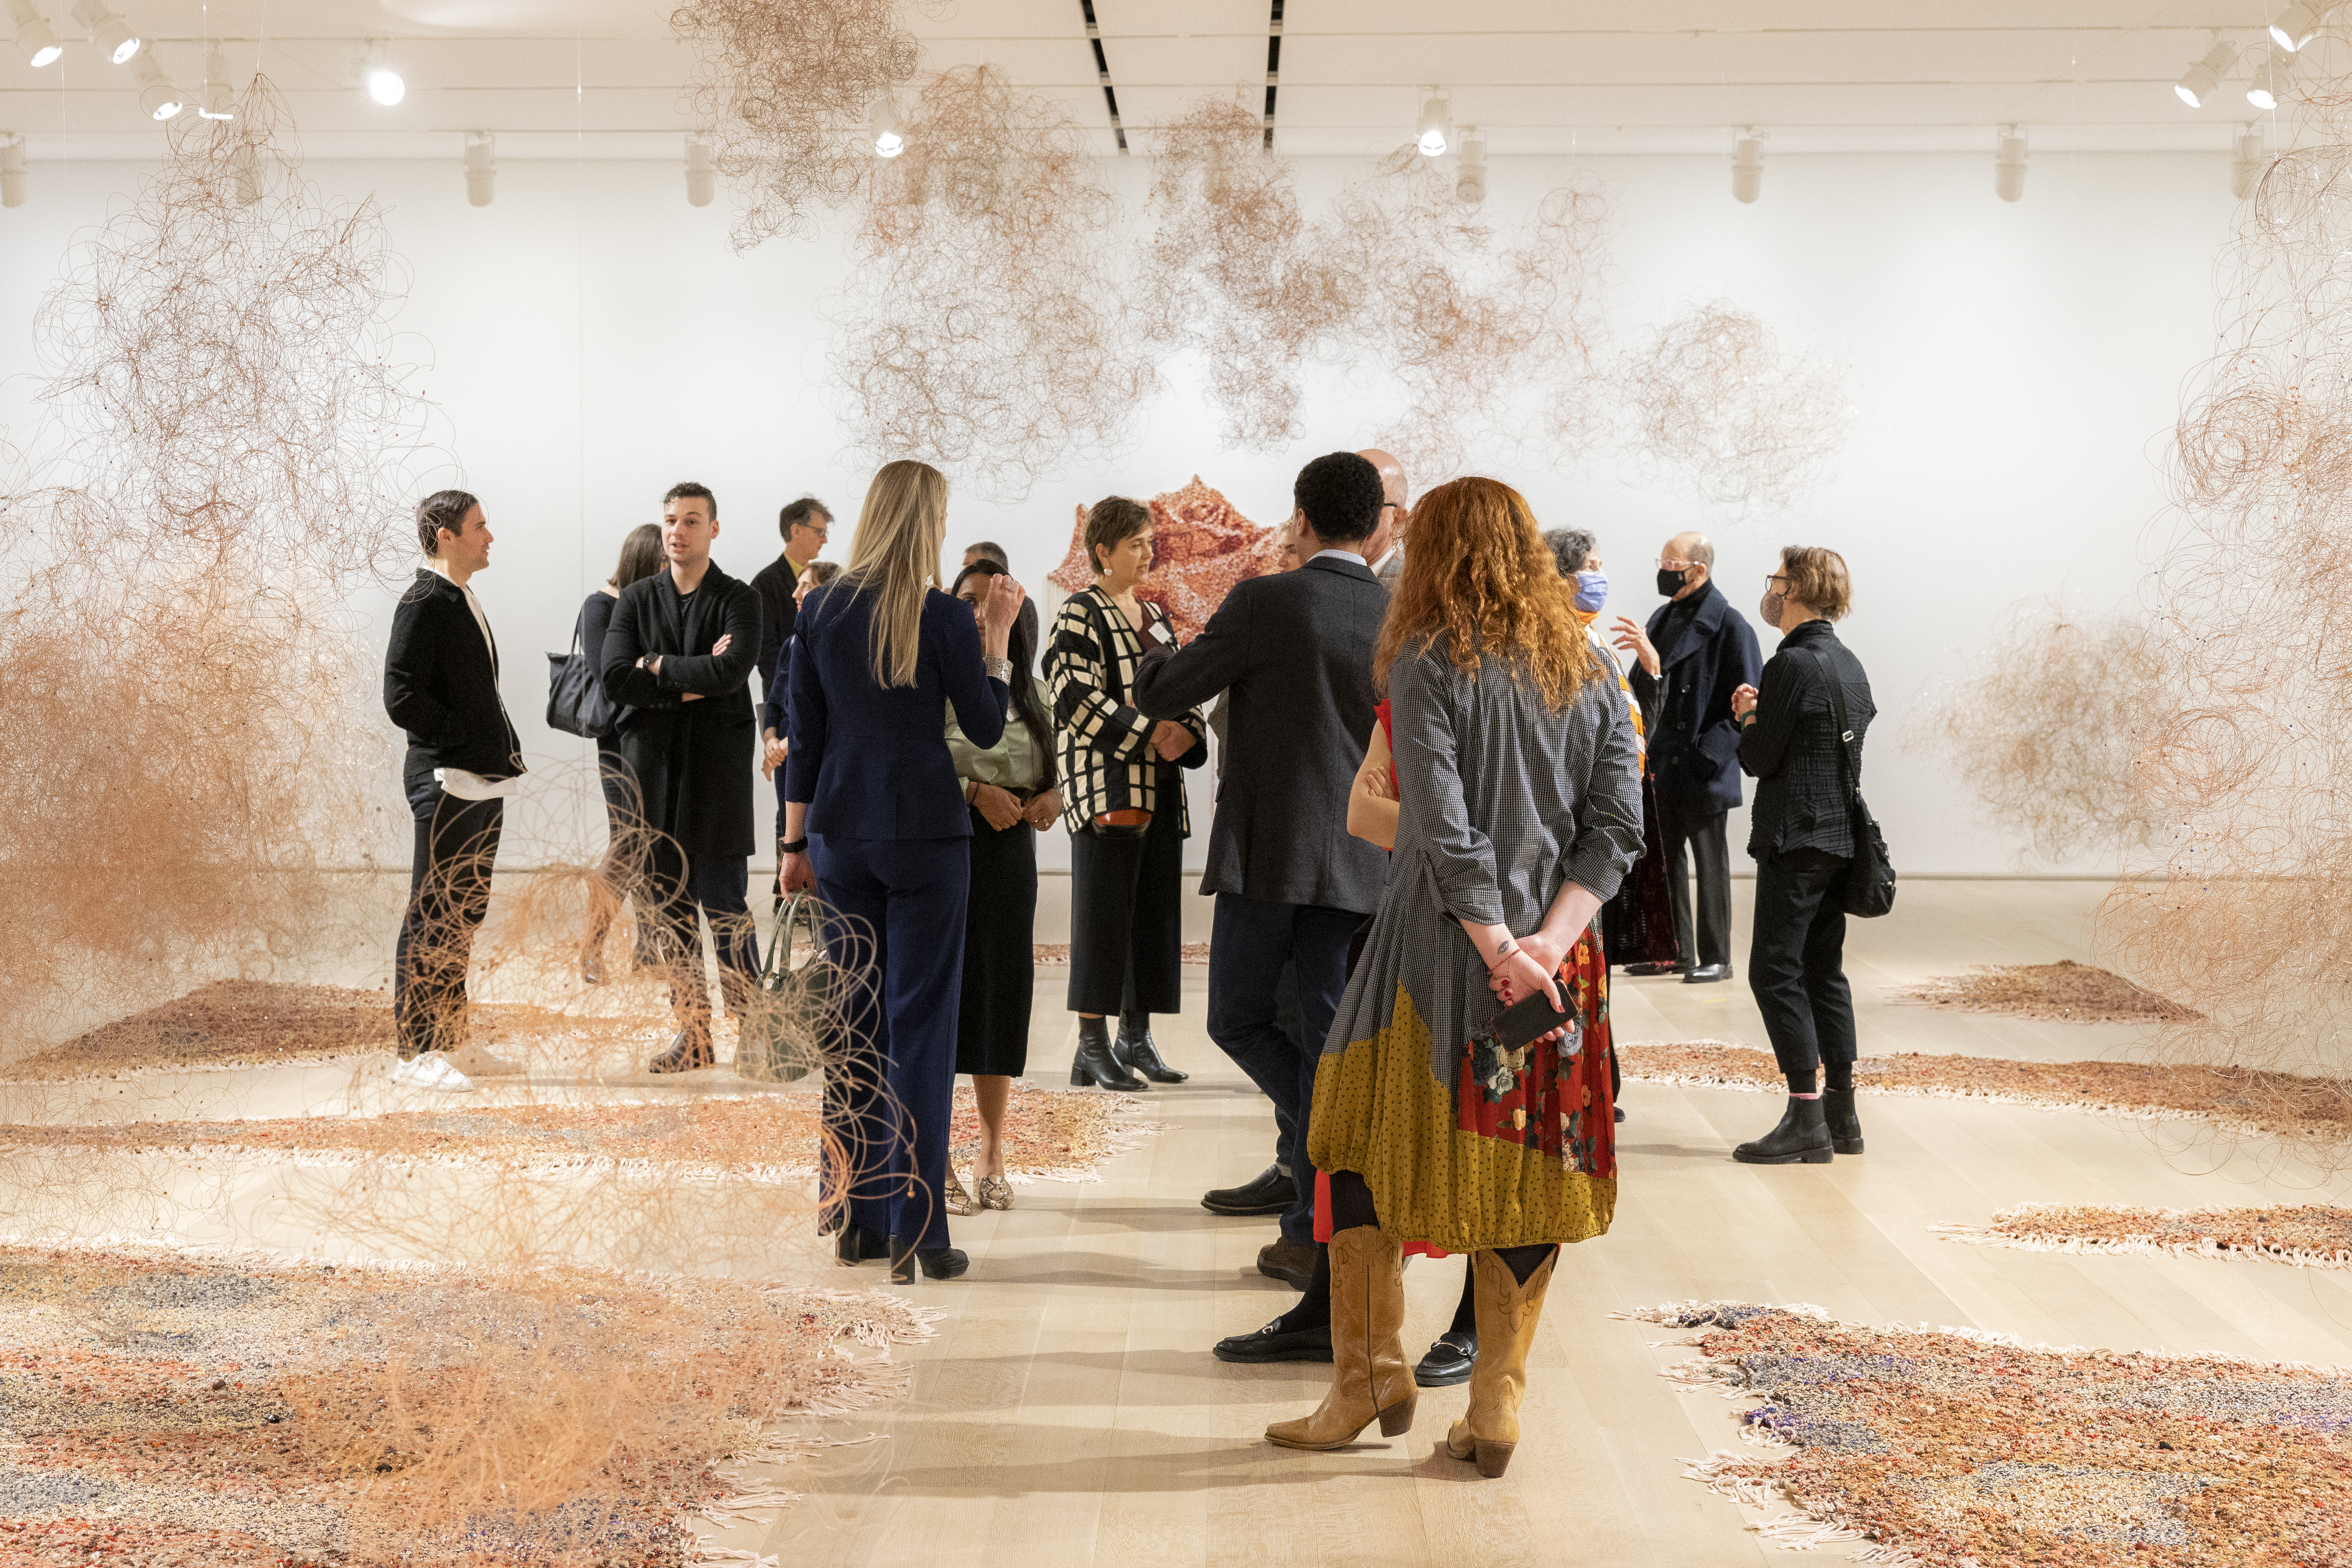 People view artwork made of beads installed on a wooden floor and hung from the ceiling.